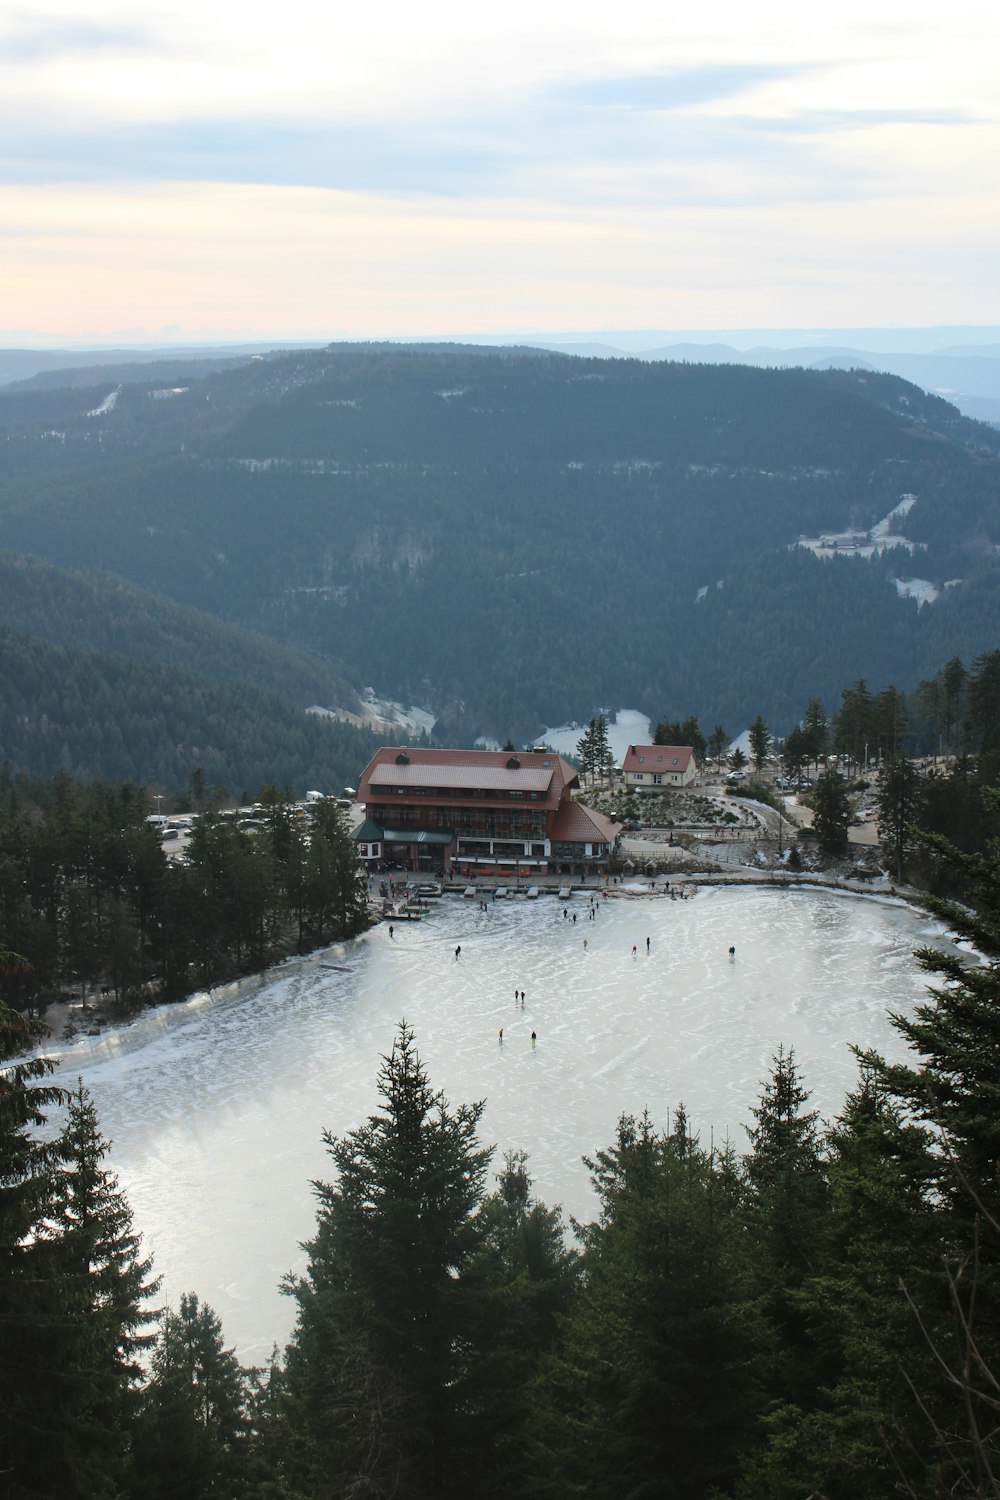 a view of a ski resort from a hill